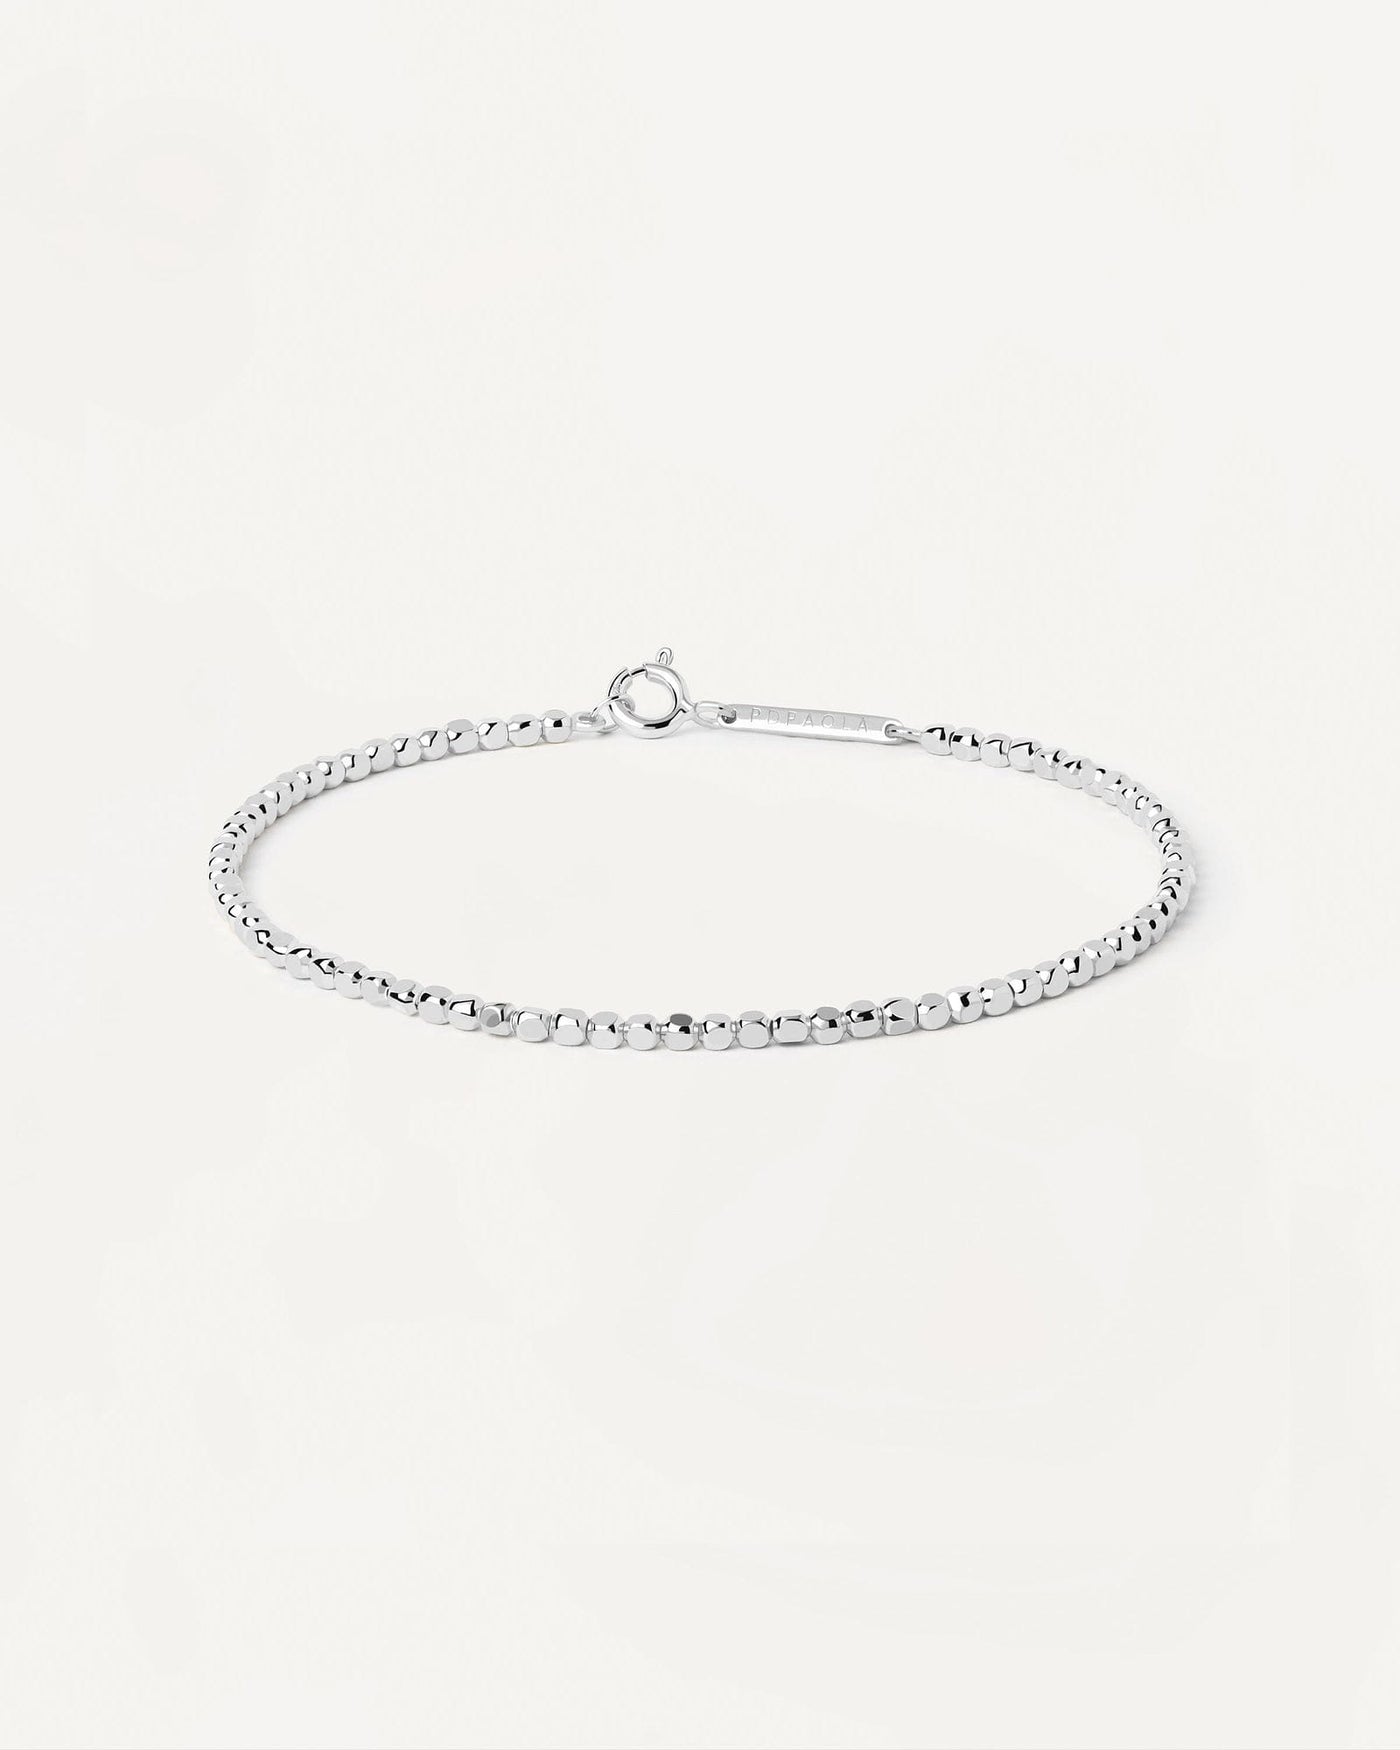 2024 Selection | Marina Silver Chain Bracelet. 925 silver bracelet with asymetric bead links. Get the latest arrival from PDPAOLA. Place your order safely and get this Best Seller. Free Shipping.